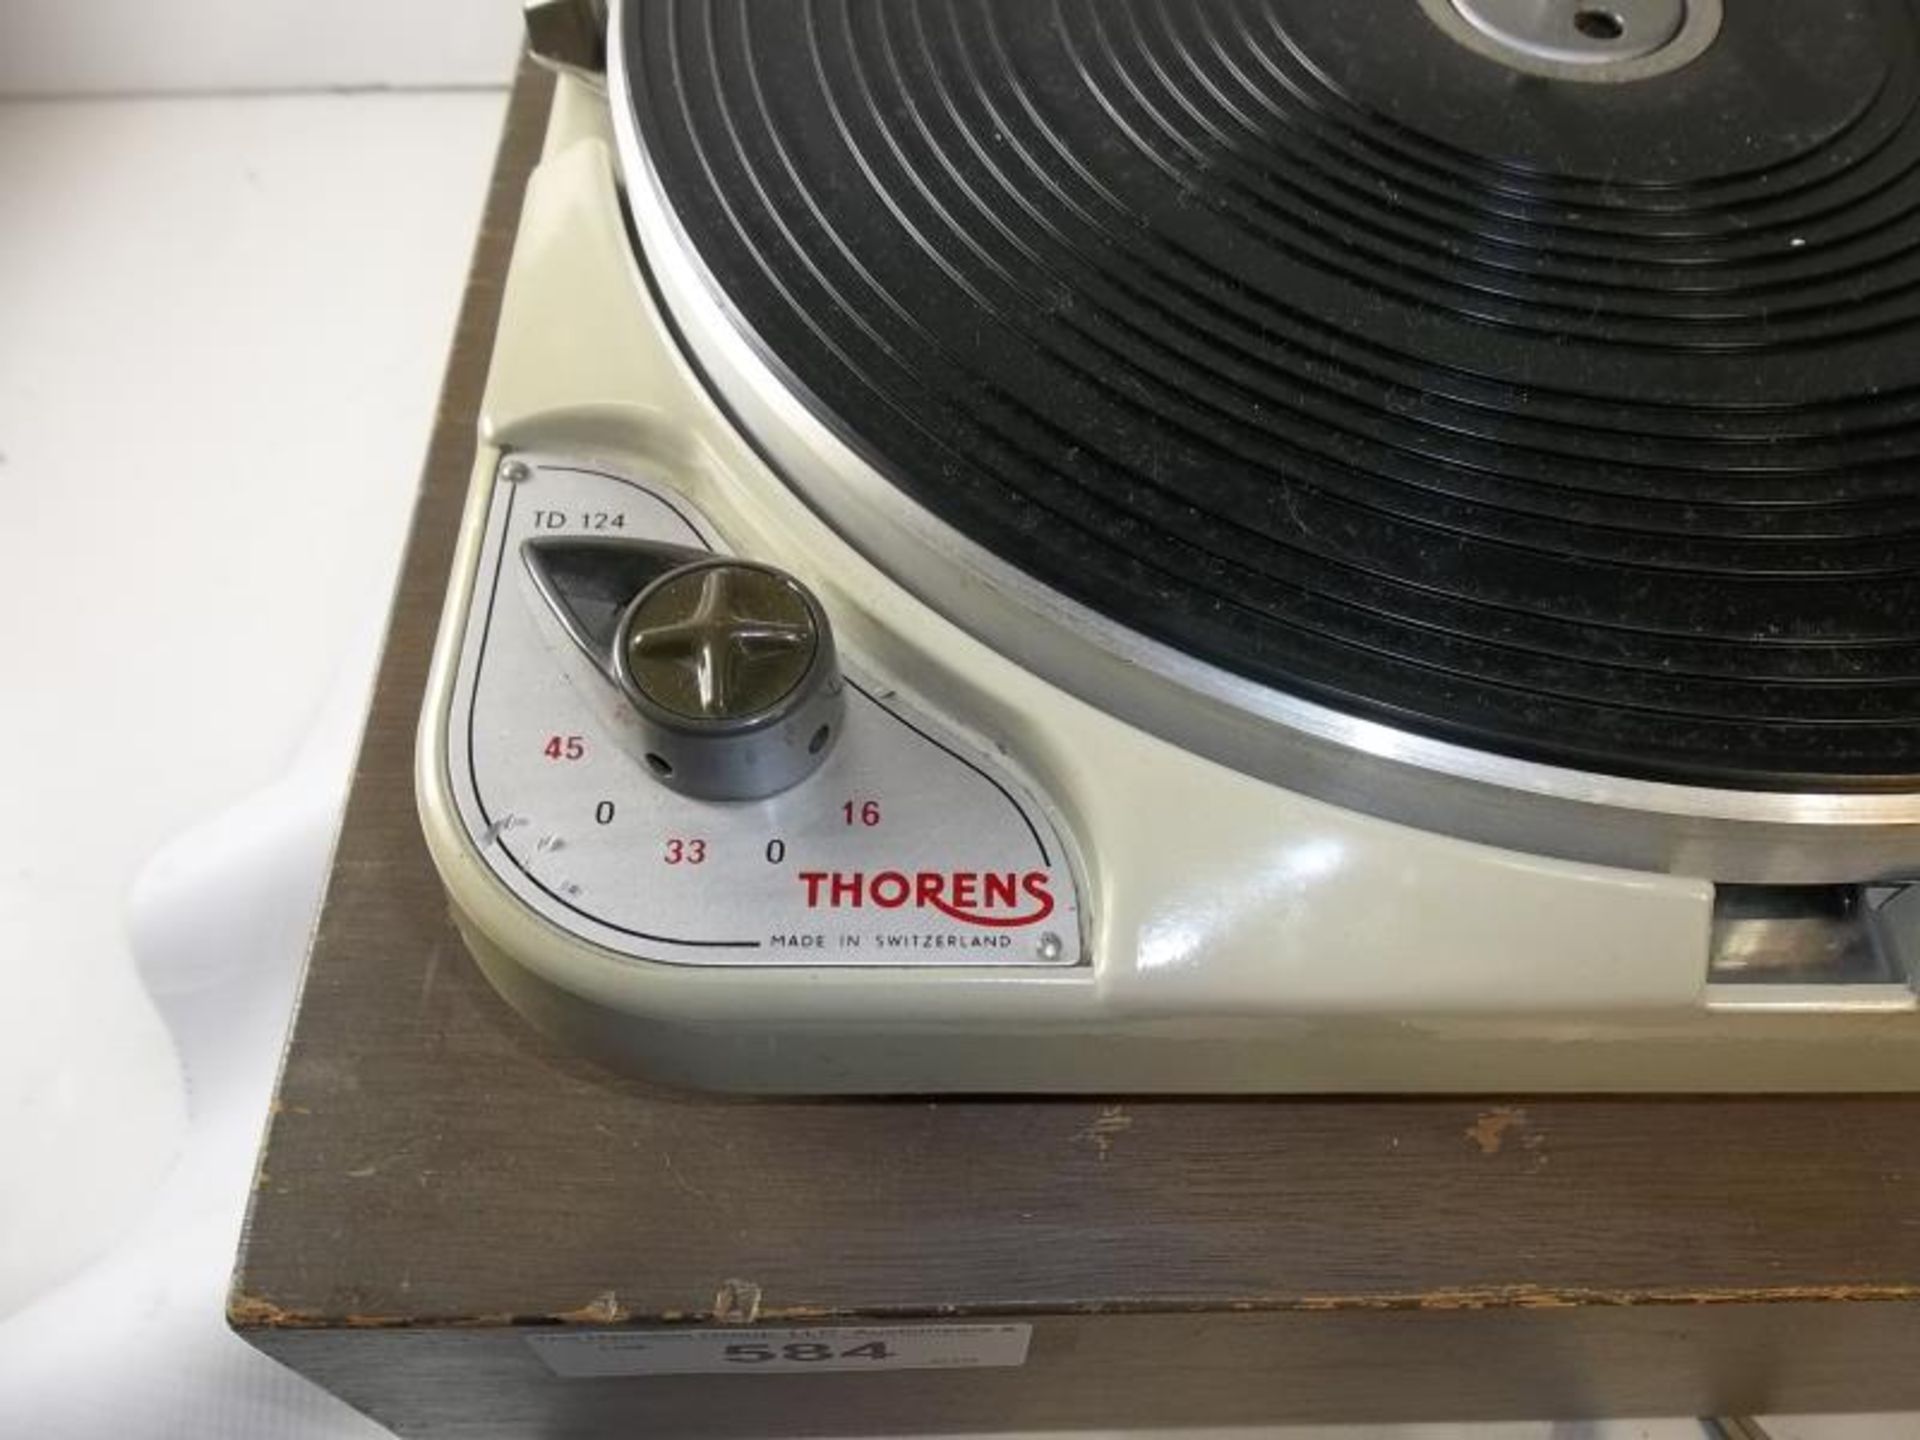 Thorens TD-124 turn table, #40946, made in Switzerland, 16, 33, 45, 78, no arm board or arm, base is - Image 2 of 3